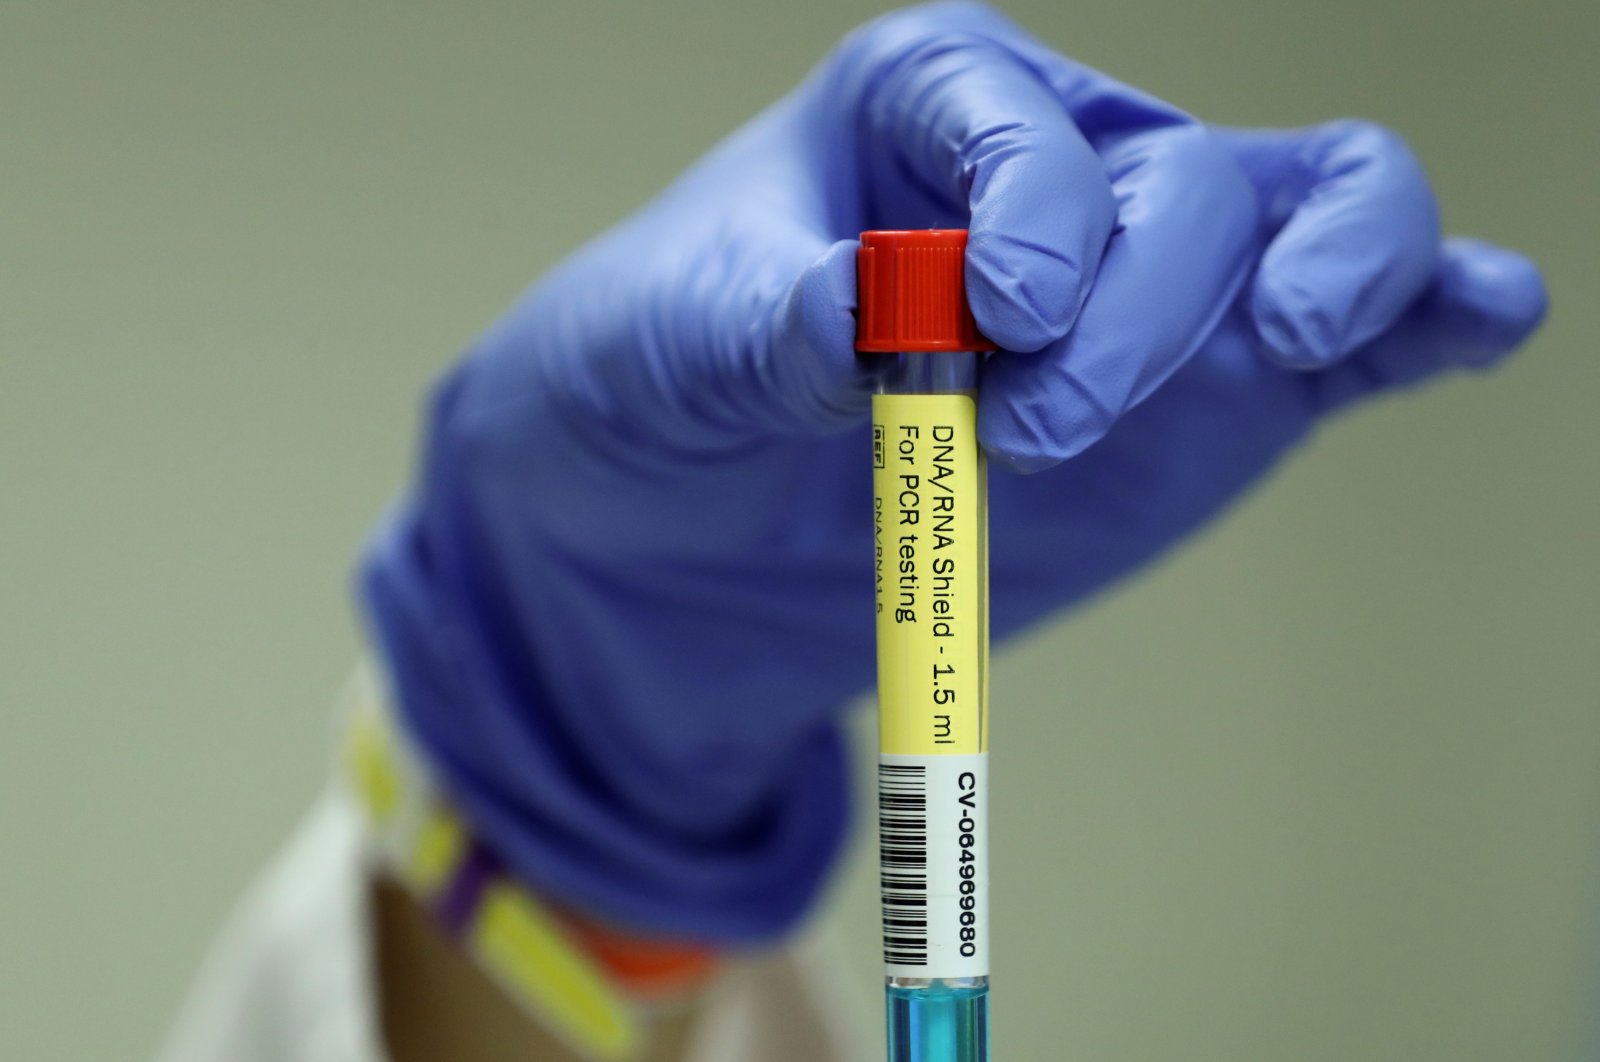 A laboratory worker shows a PCR test for the coronavirus disease at the University of Liege, Belgium. Aug. 12, 2020. (Reuters Photo)